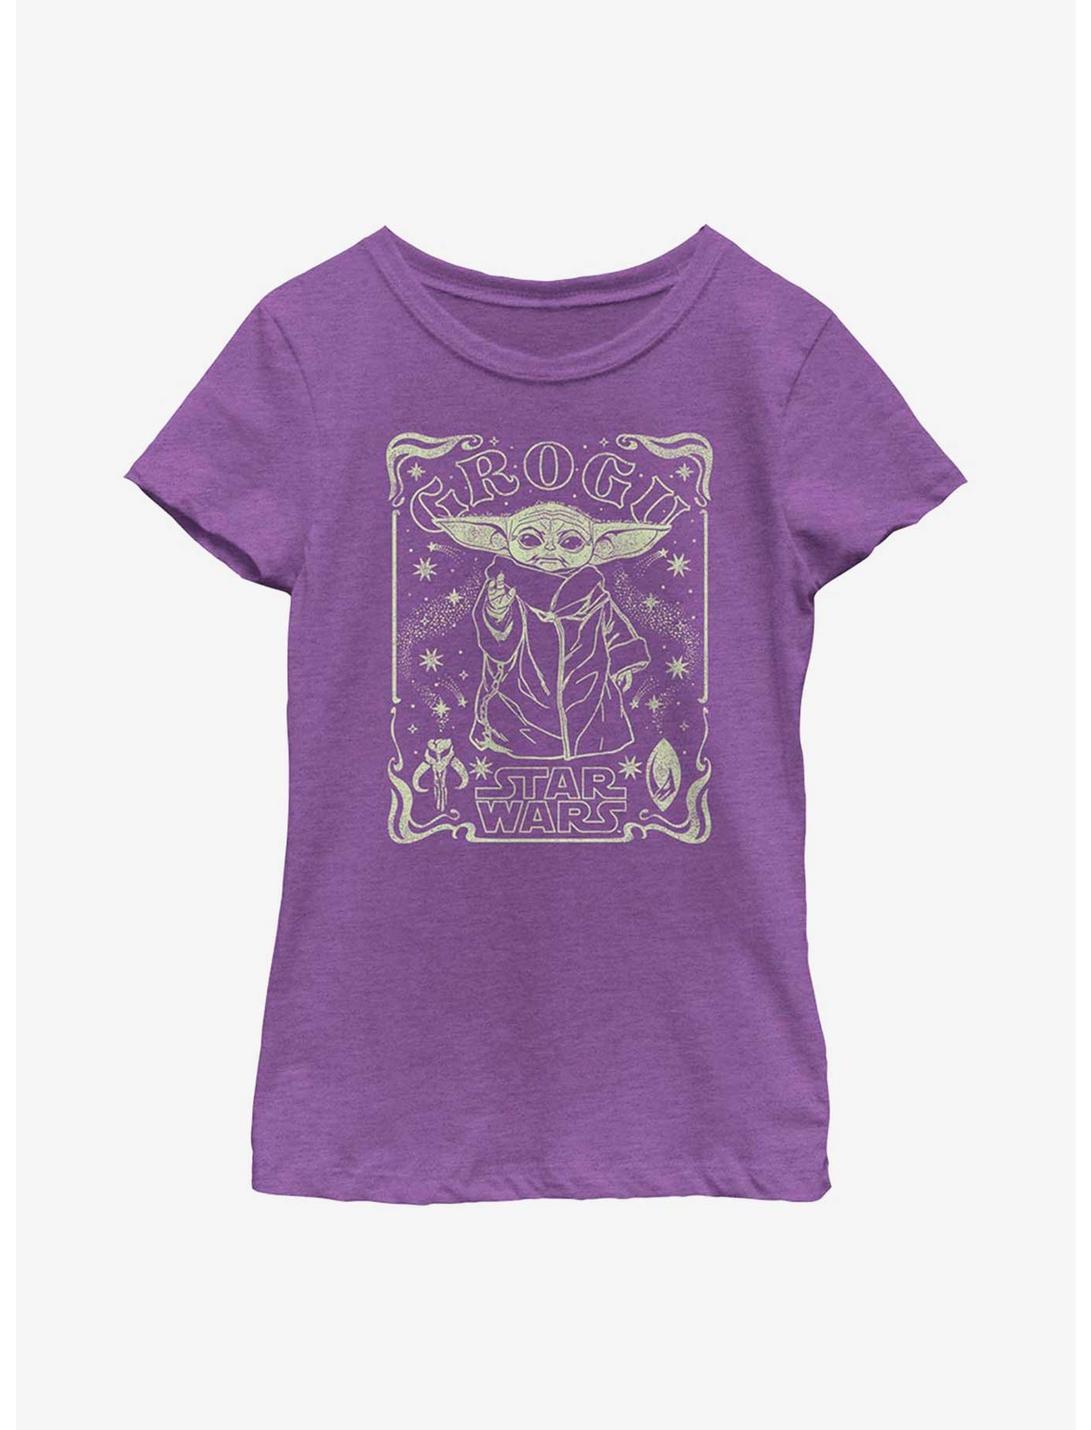 Star Wars The Mandalorian Starry The Child Youth Girls T-Shirt, PURPLE BERRY, hi-res